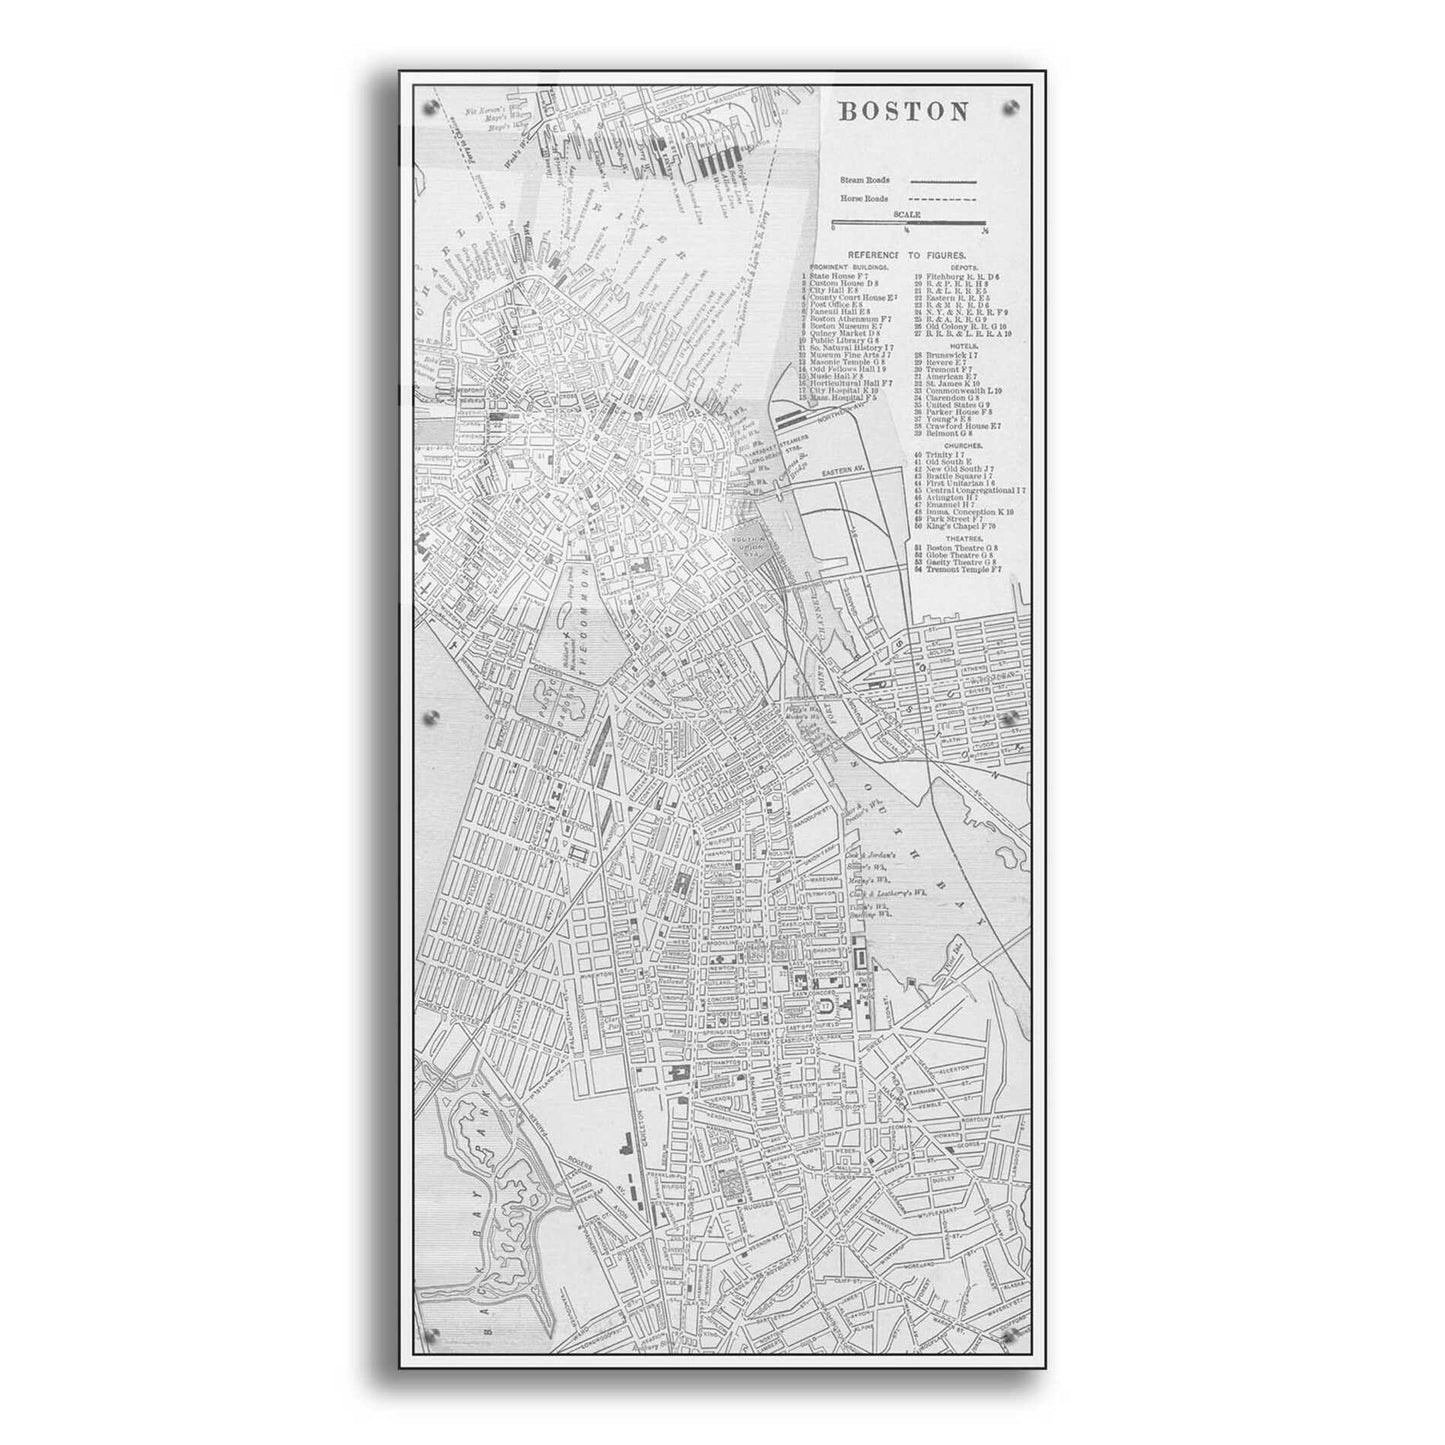 Epic Art 'Tinted Map of Boston' by  Vision Studio, Acrylic Glass Wall Art,24x48